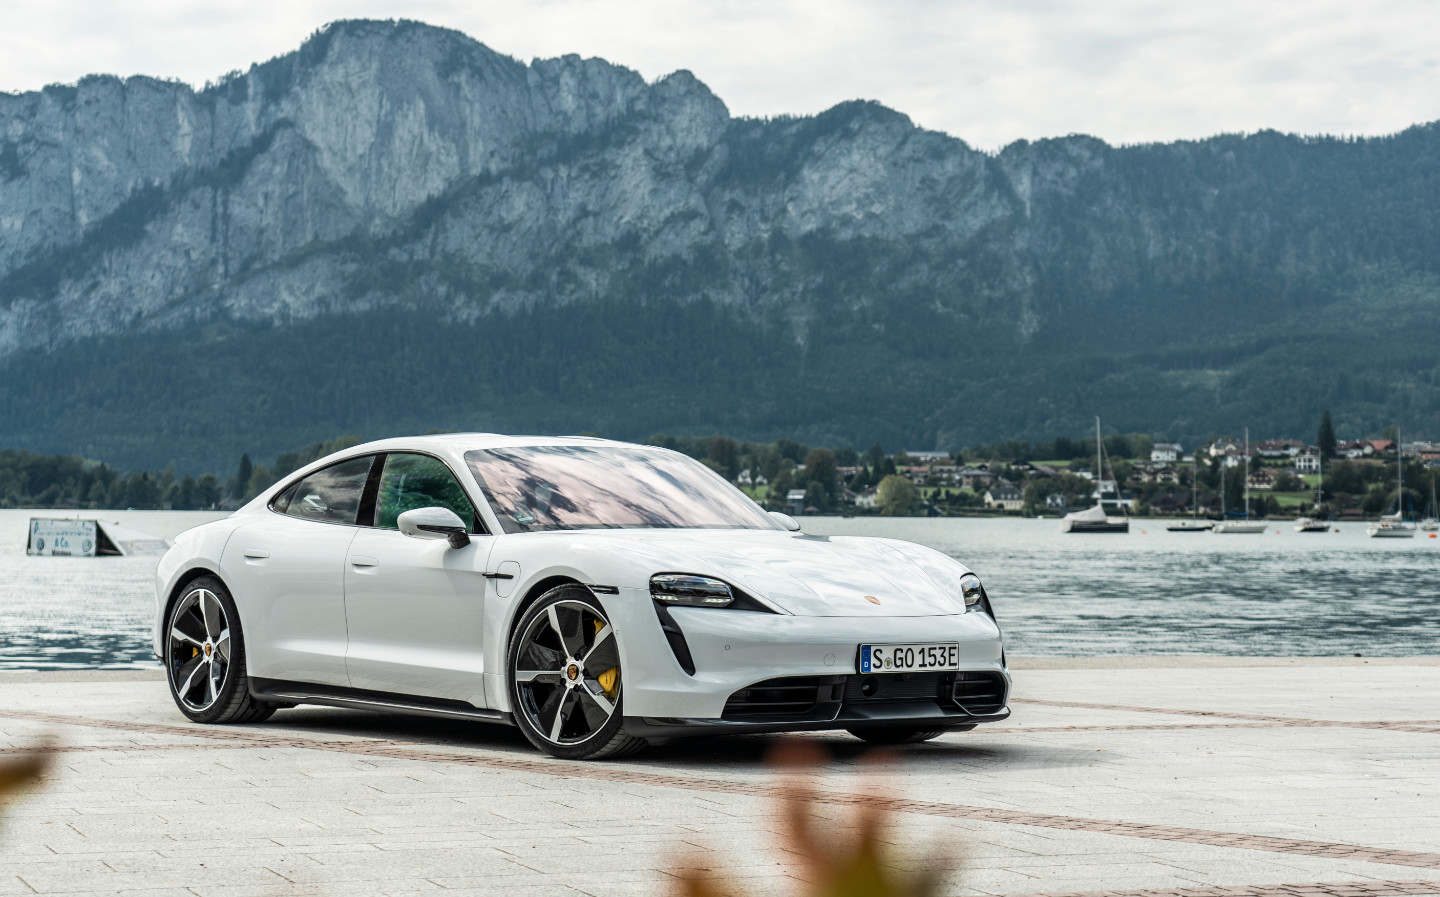 2021 Porsche Taycan faster and smarter